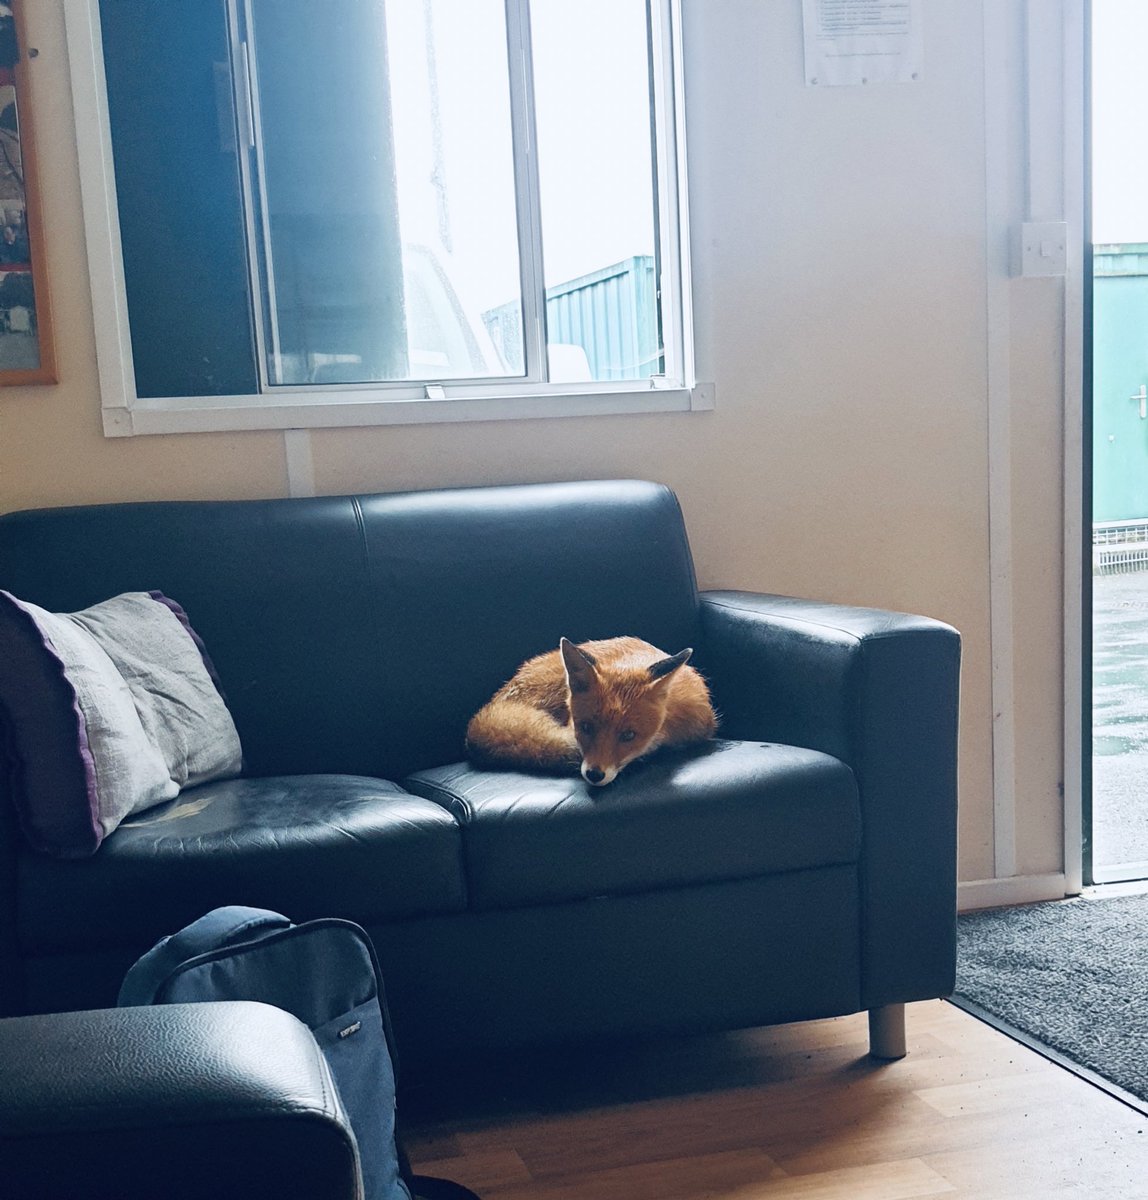 🦊 A cunning fox finds shelters from the rain:   A regular visitor to our Permanent Way Heuston Division , ‘Basil’ the Fox found the comfort of a sofa during a tea break yesterday 🦊